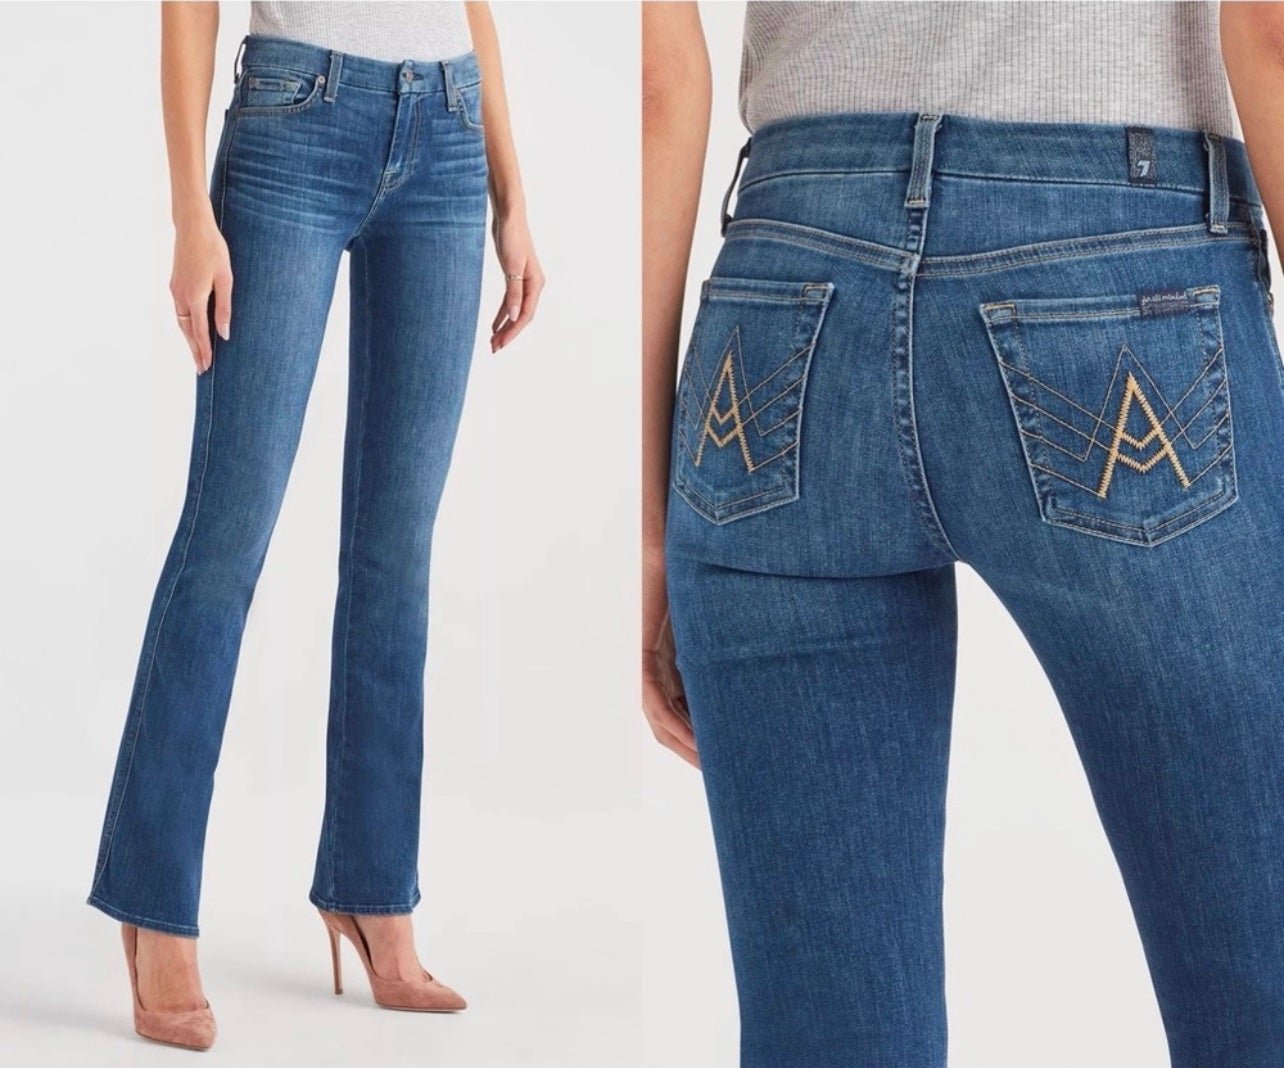 Elegant 7 for All Mankind A Pocket Flare Jeans in Anthe